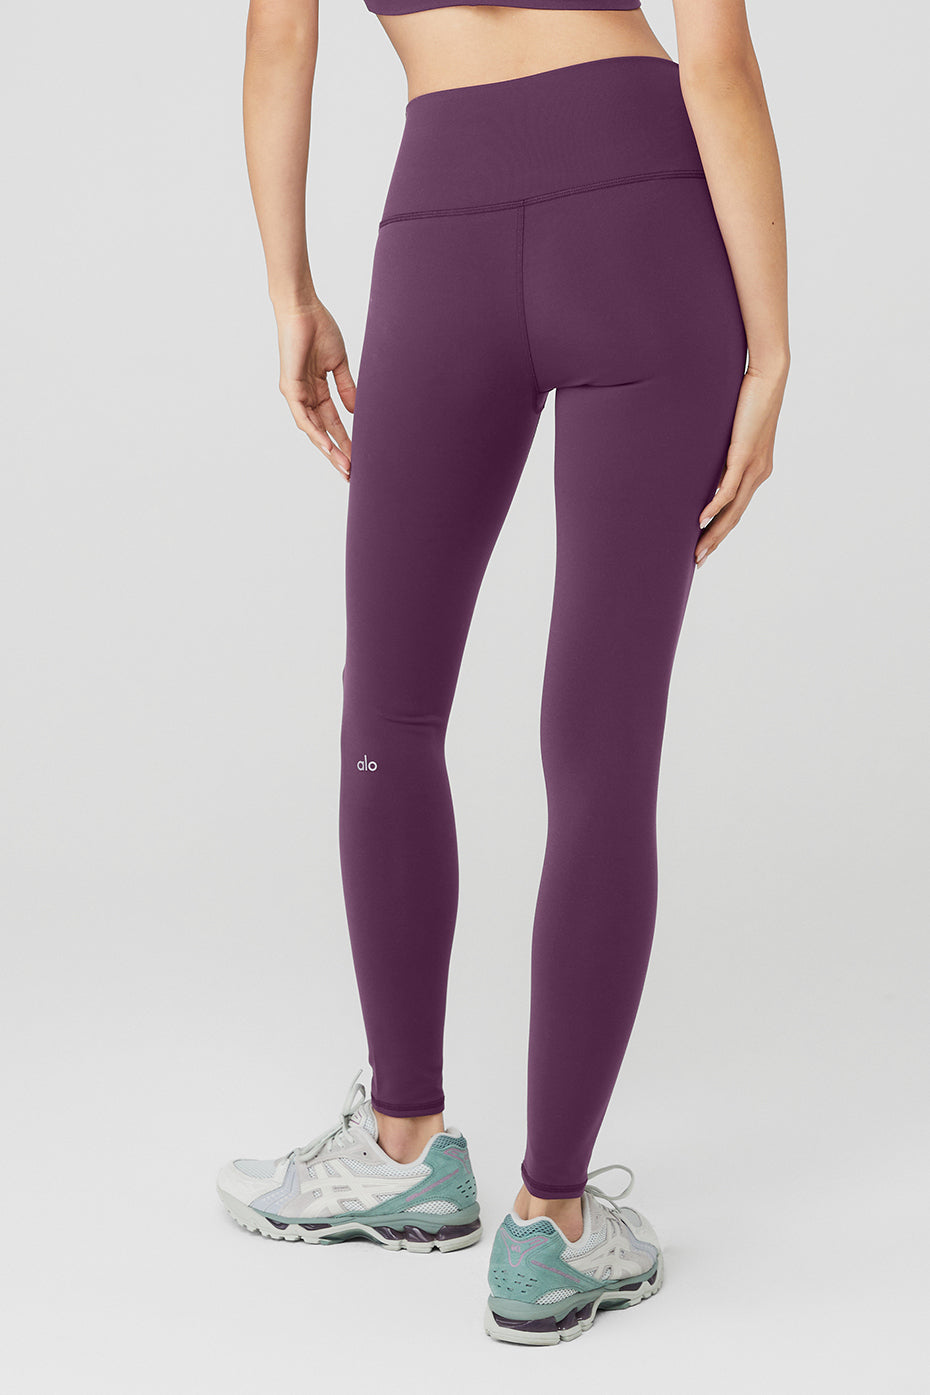 Lululemon Align High-Rise Pant 28 – The Shop at Equinox